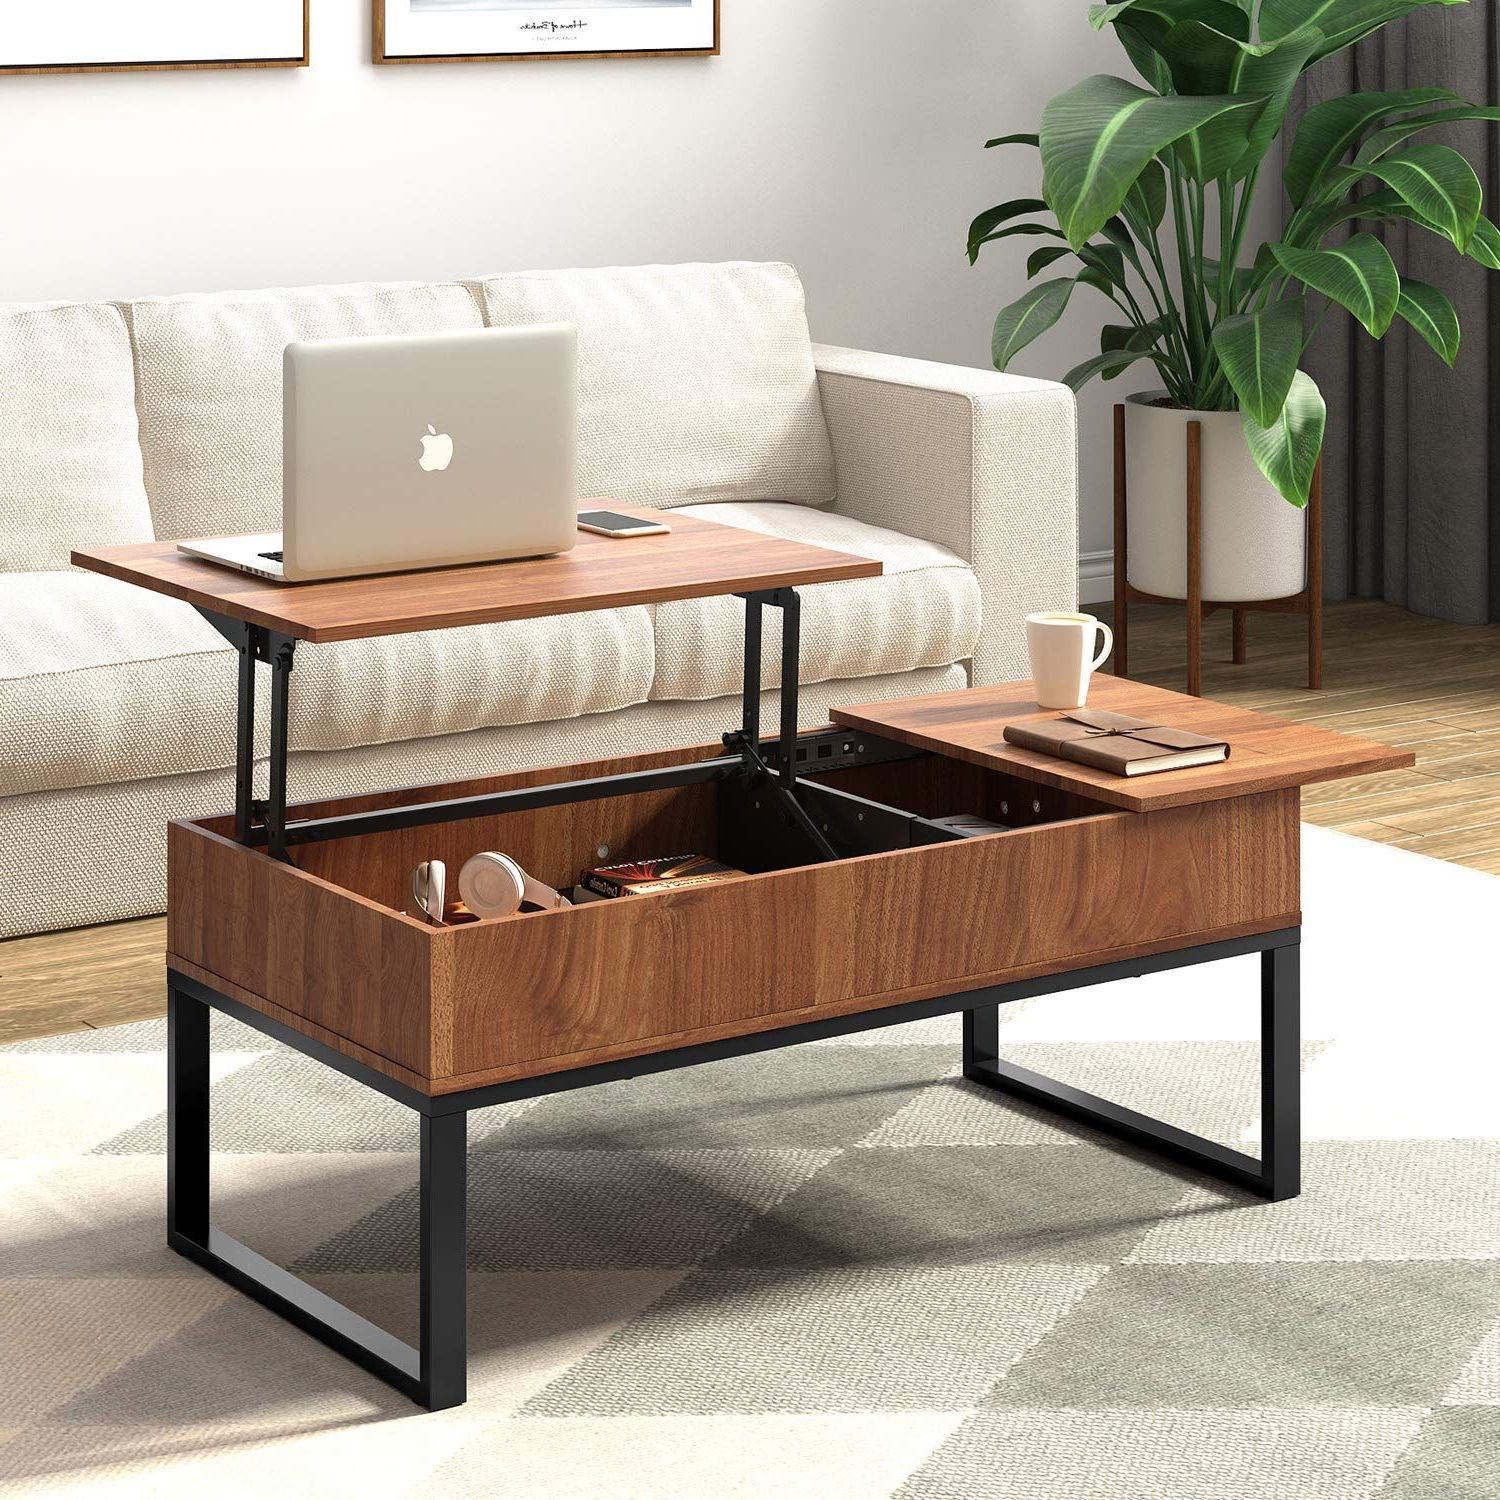 Most Up To Date Wlive Wood Coffee Table With Adjustable Lift Top Table, Metal Frame Pertaining To Lift Top Coffee Tables With Storage Drawers (View 15 of 15)